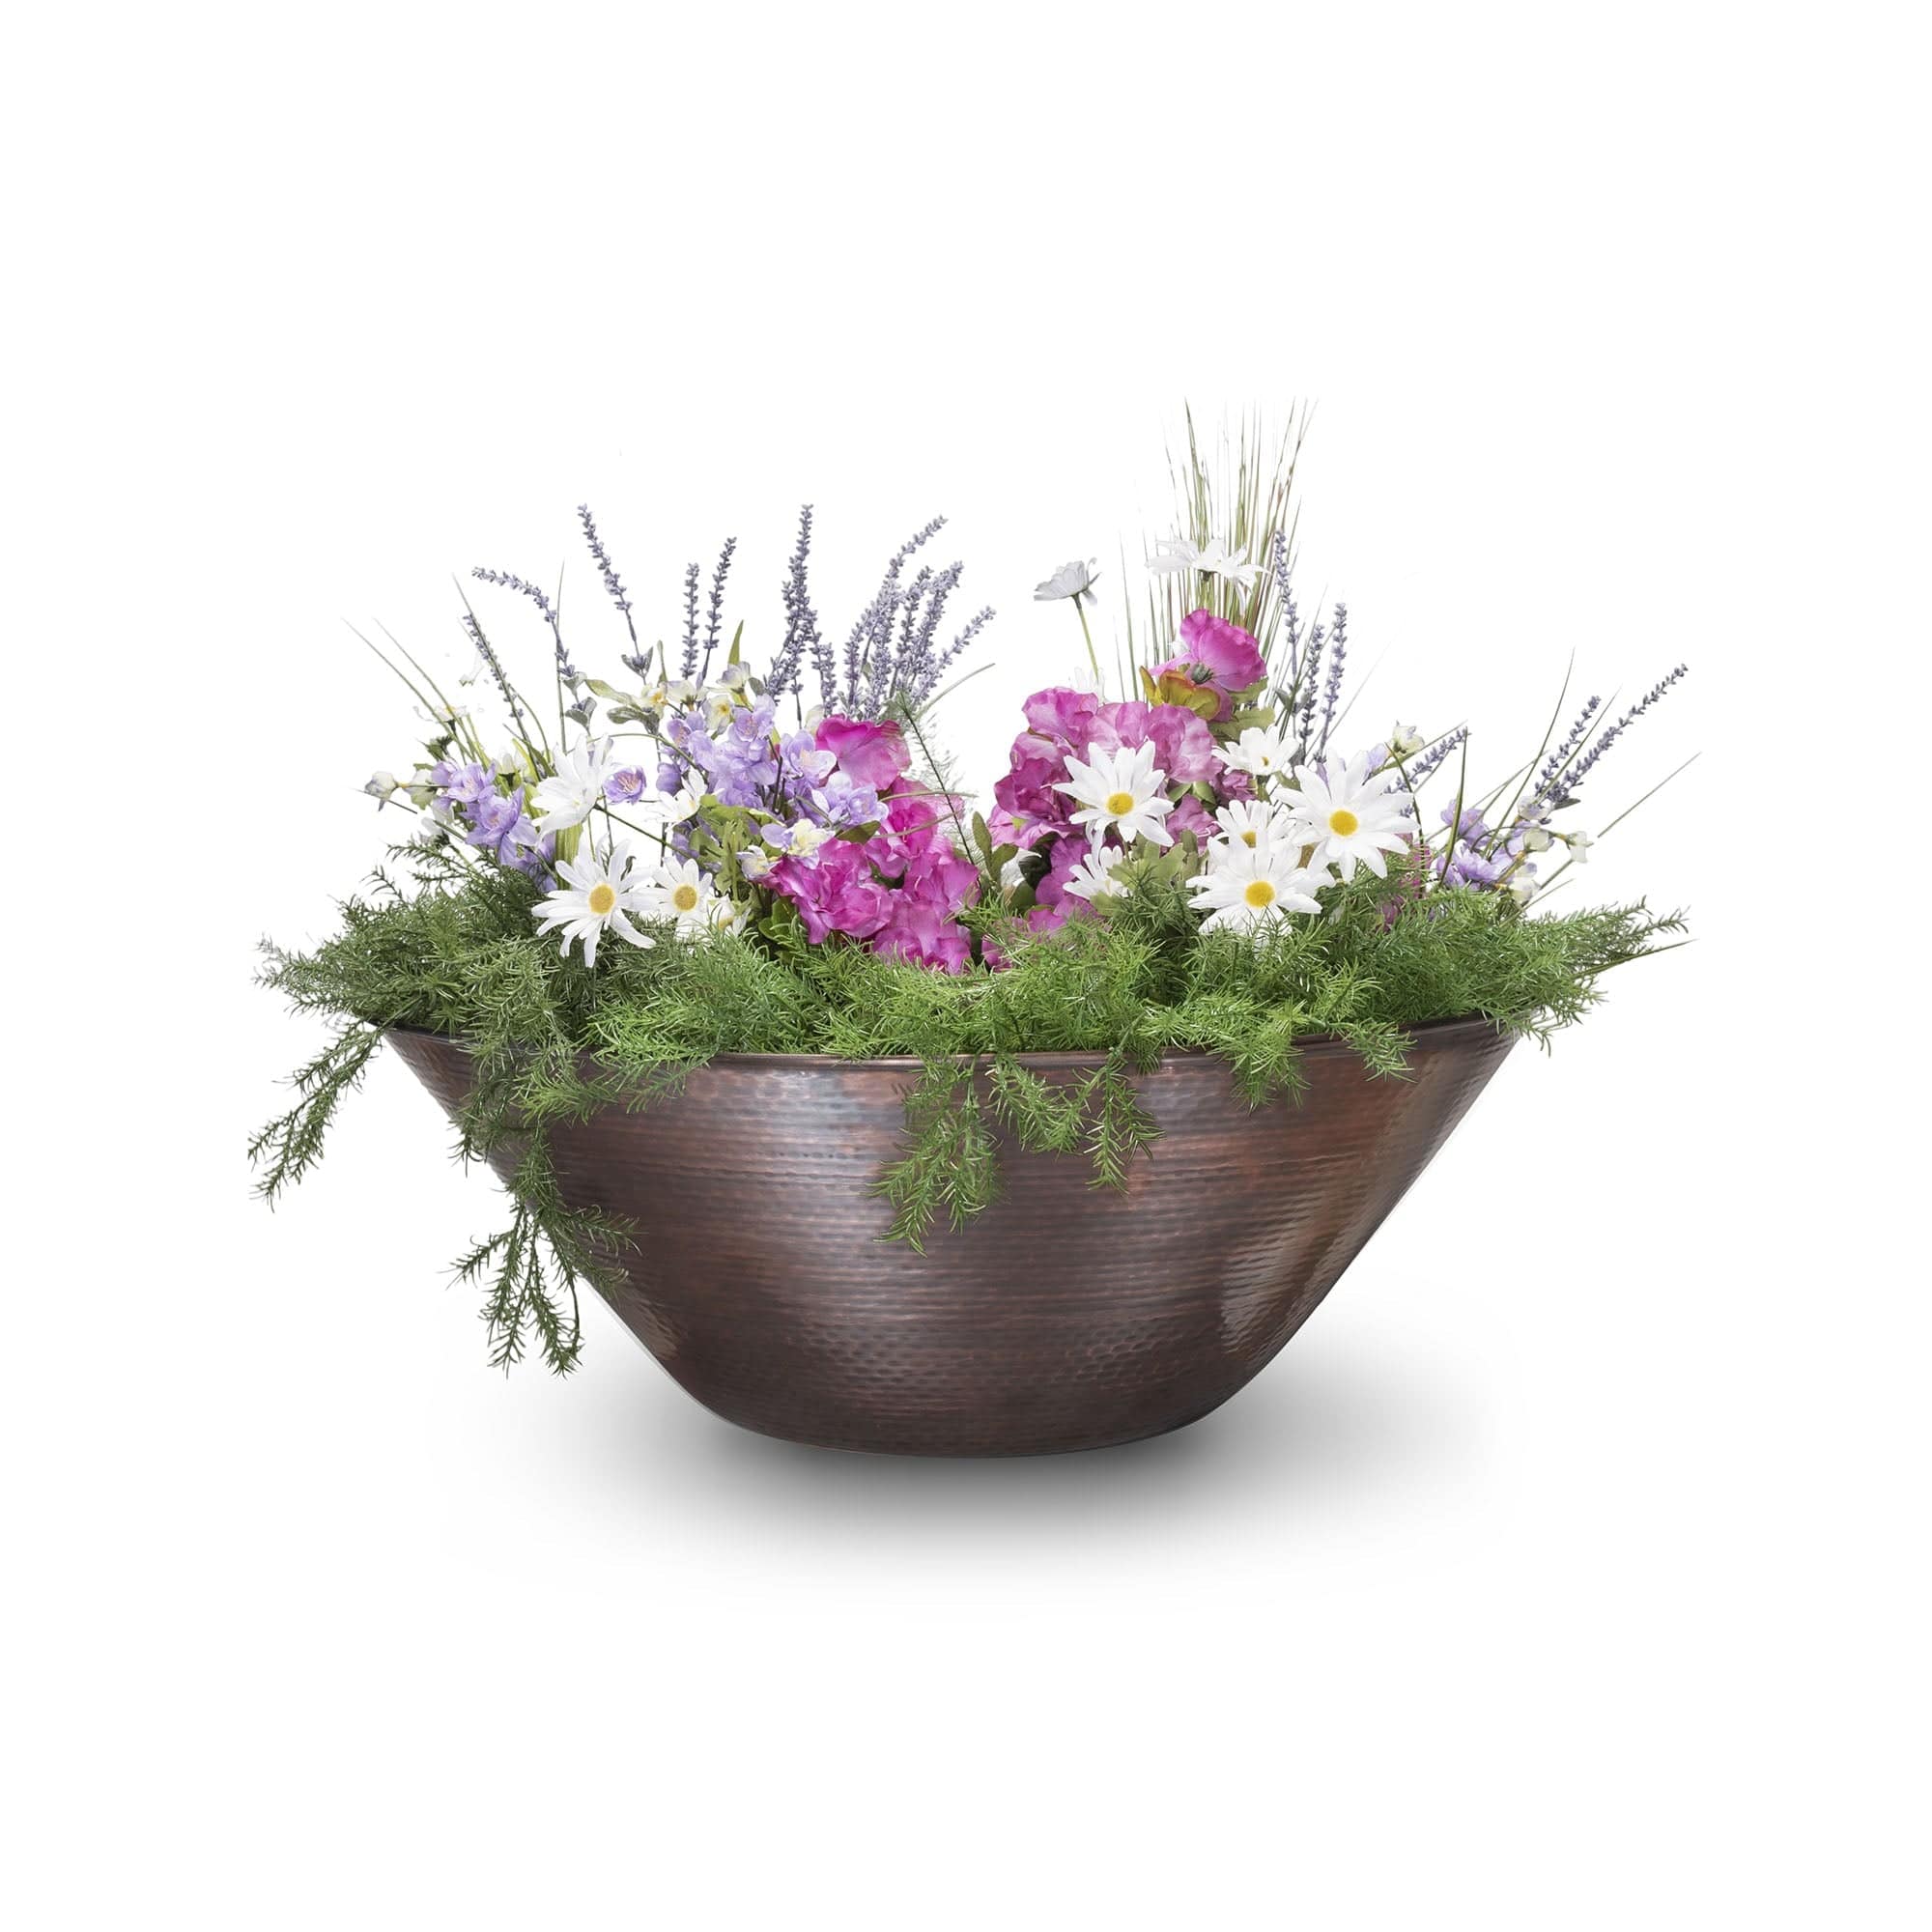 The Outdoor Plus Planter Bowl The Outdoor Plus Remi 31"Planter Bowl | Hammered Copper OPT-31RCPO